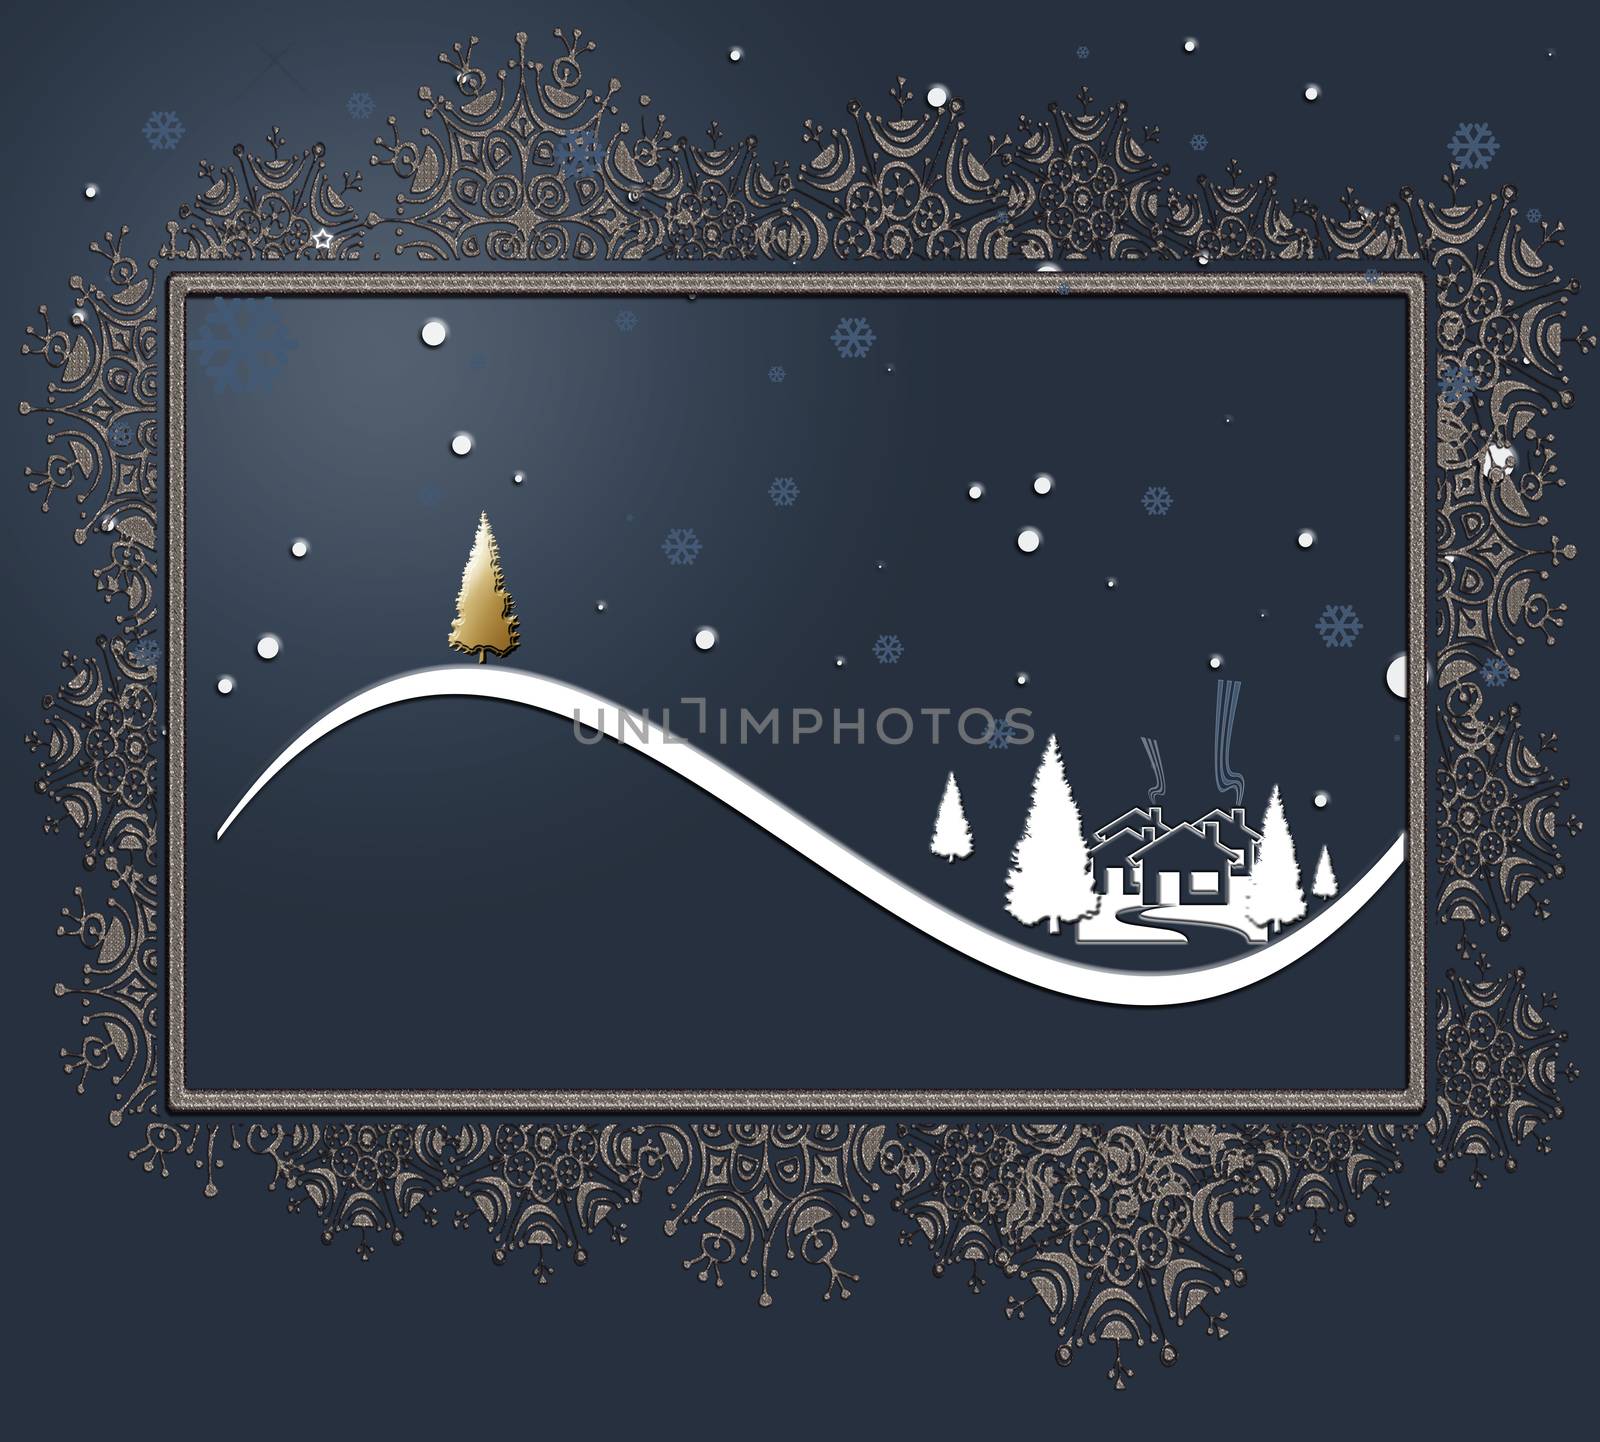 Beautiful stylish luxury Christmas winter night landscape with houses, moon, pine fir and gold Christmas trees on dark blue background, snowflake sparkling border. Design, poster. 3D Illustration